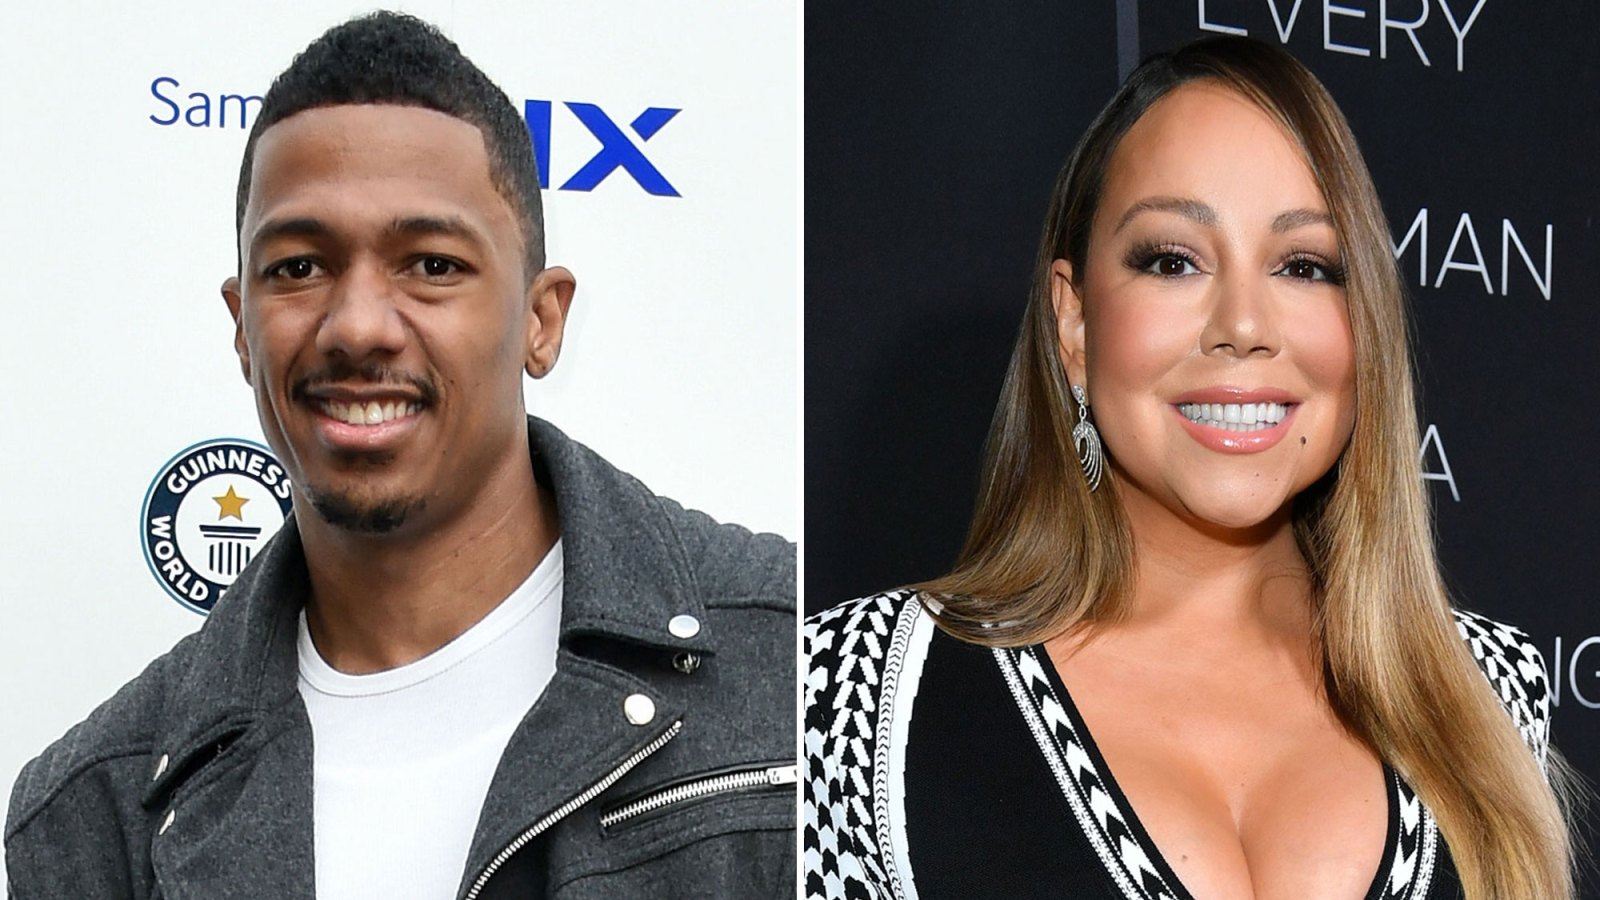 Nick Cannon Samples Mariah Carey Hints at Wanting Her Back on Breakup Regret Song Alone